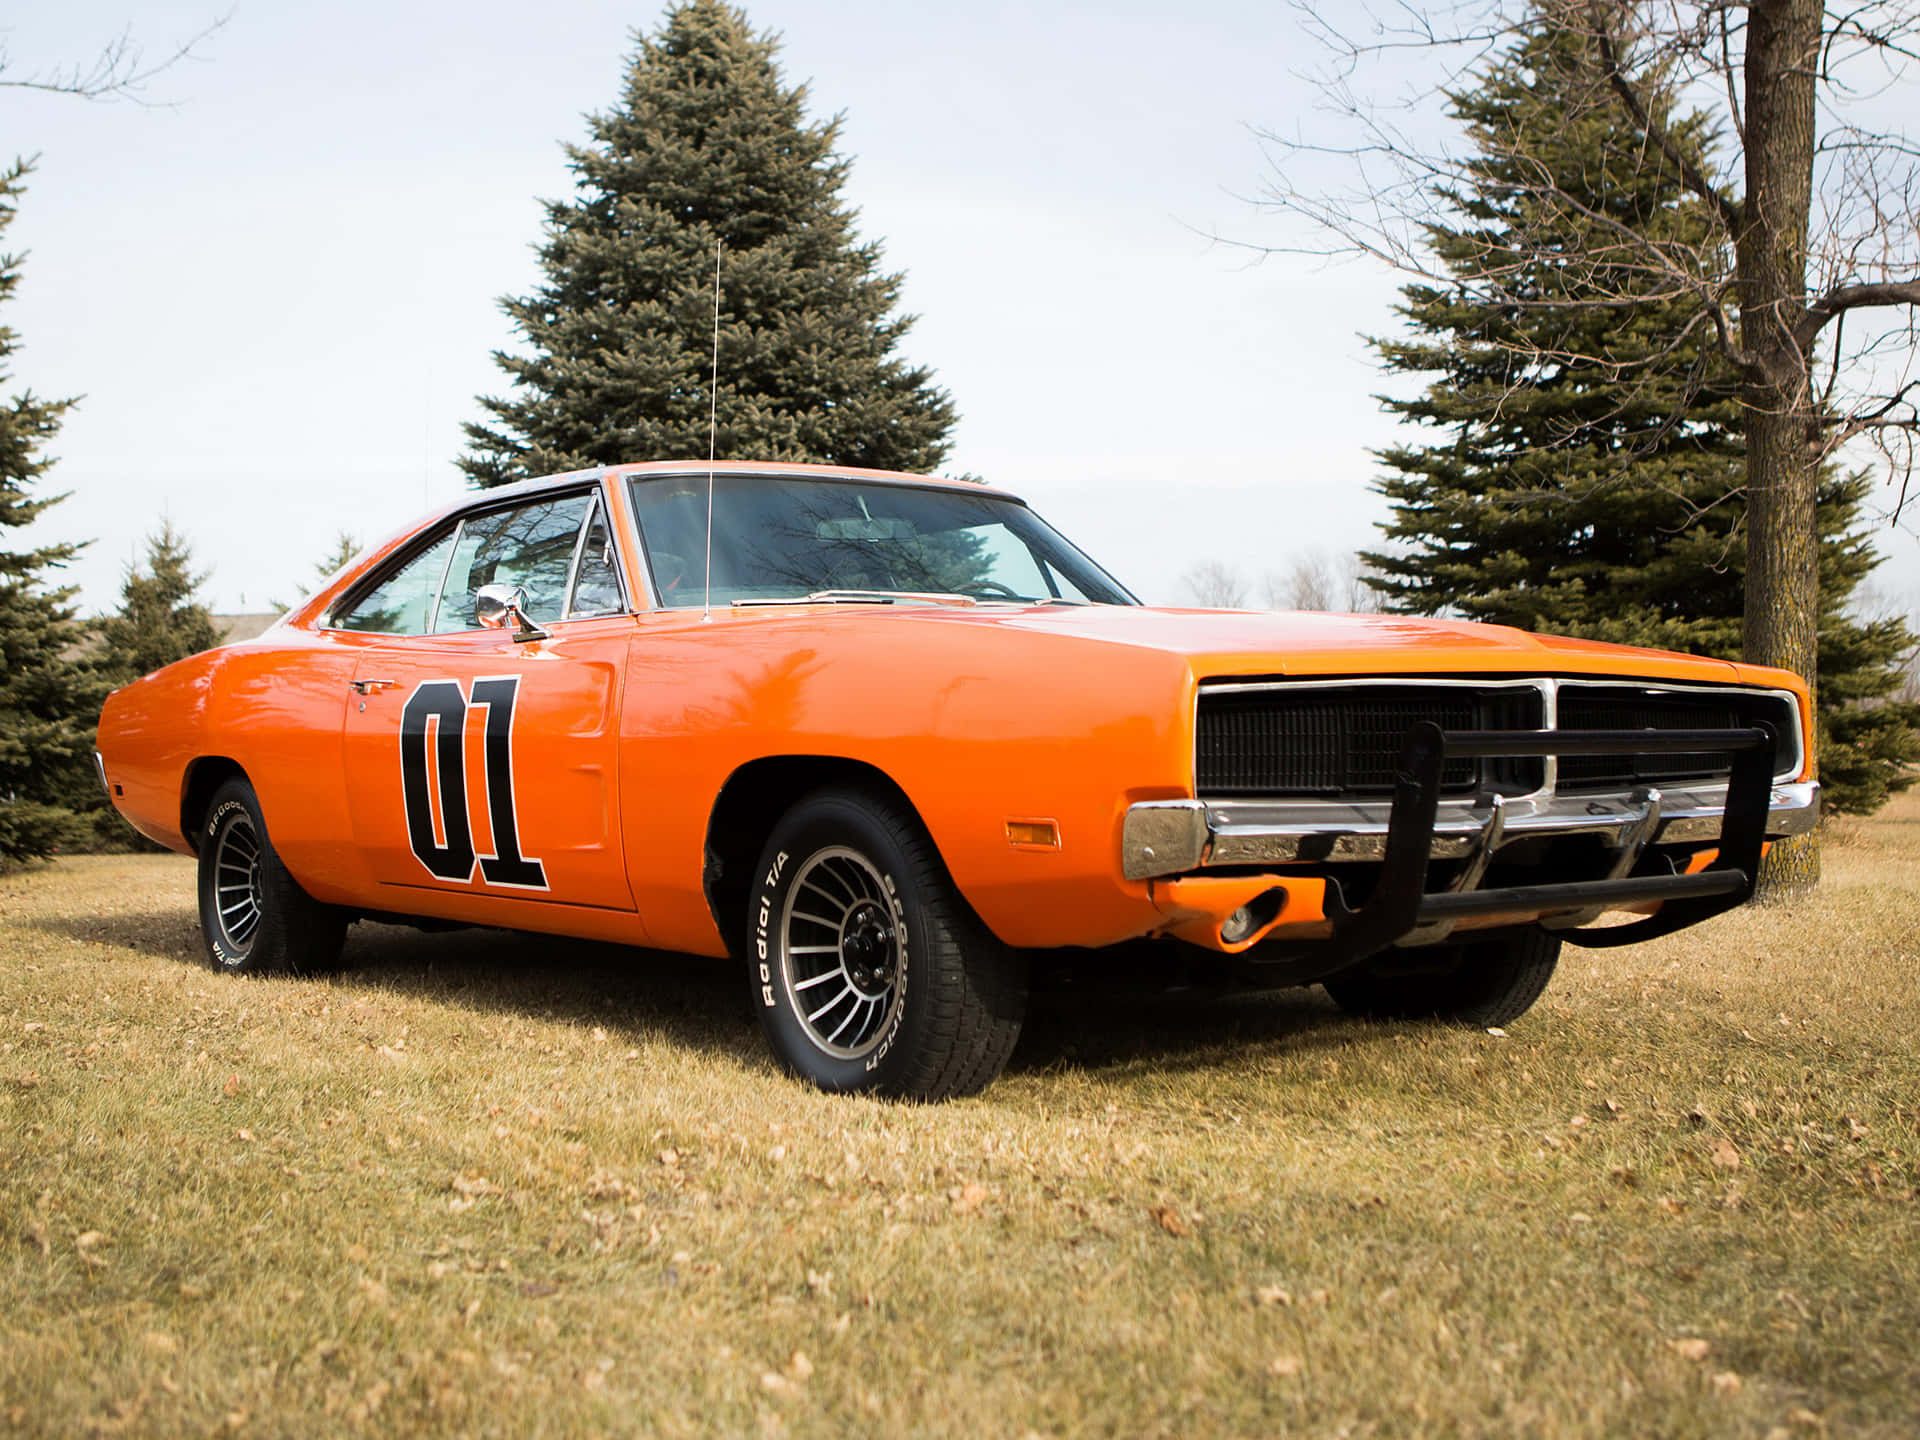 The Iconic 1969 Dodge Charger from "The Dukes of Hazard" Wallpaper